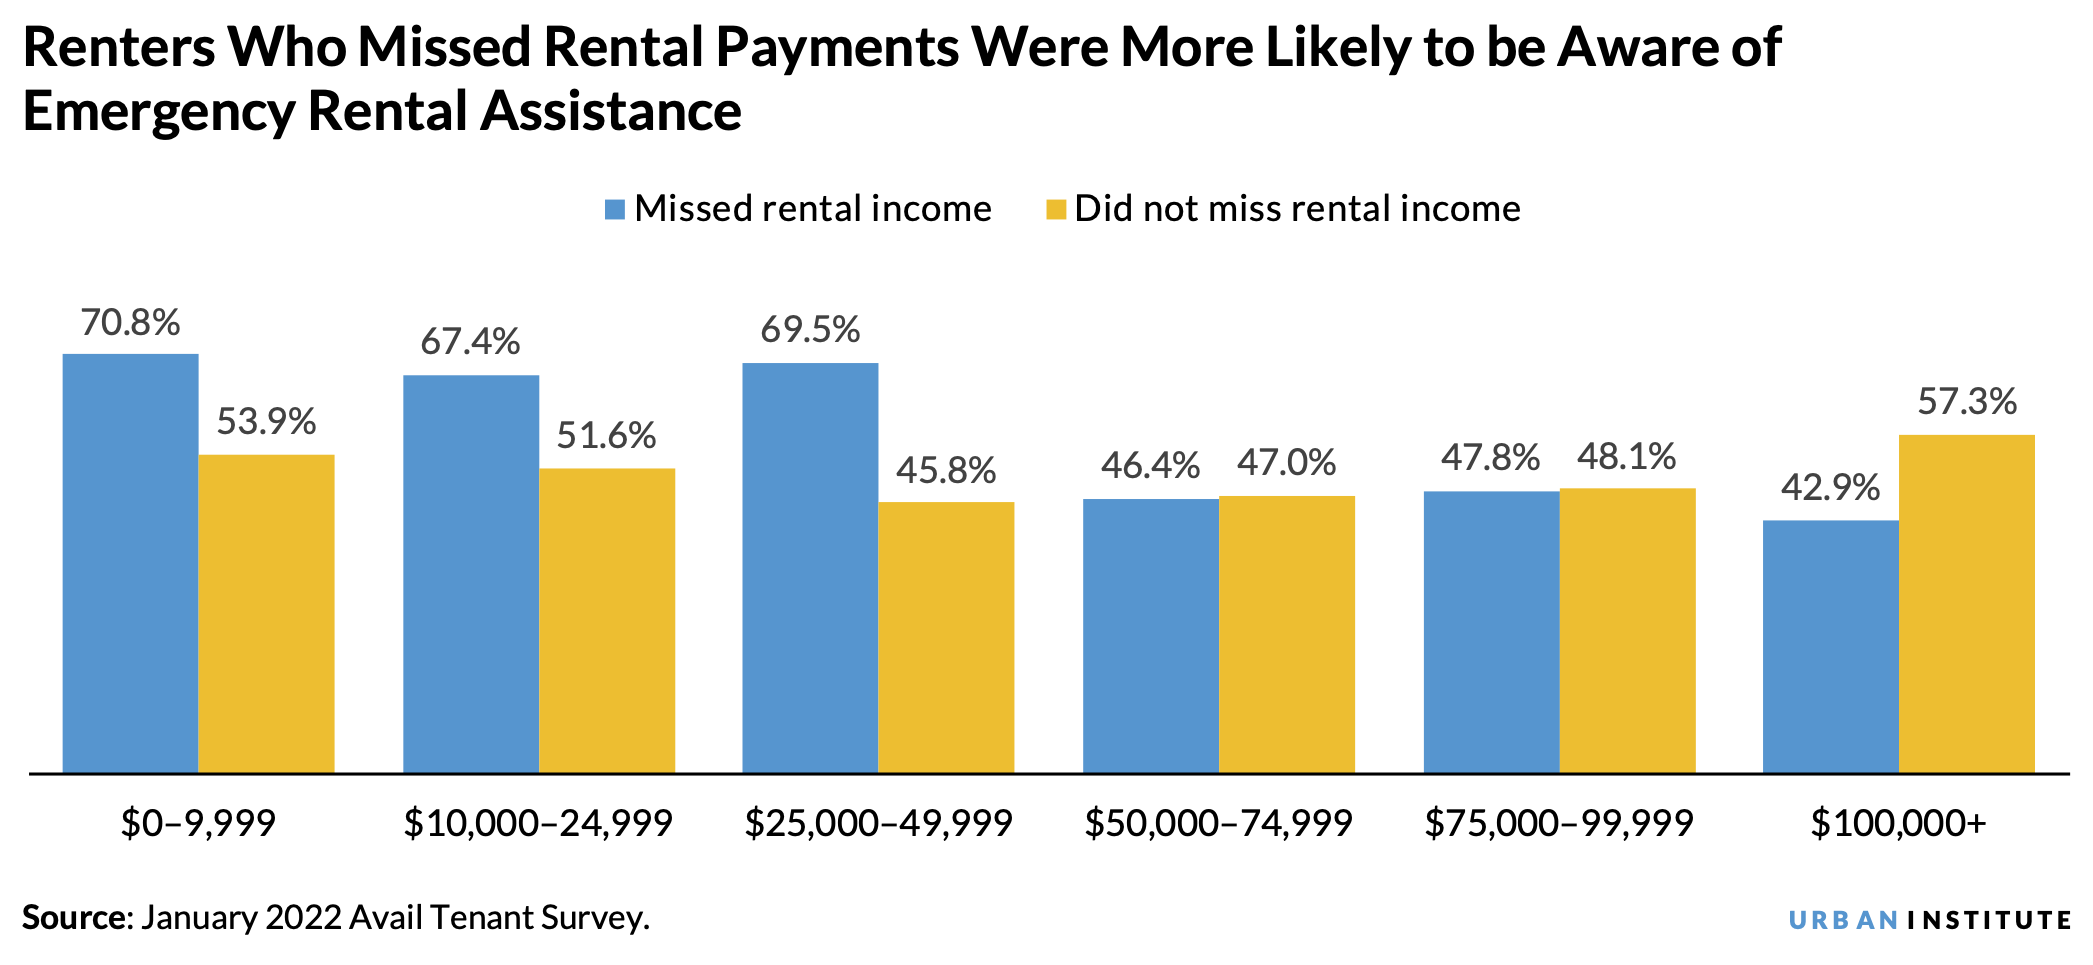 Bar chart showing that renters who missed rental payments were more likely to be aware of Emergency Rental Assistance